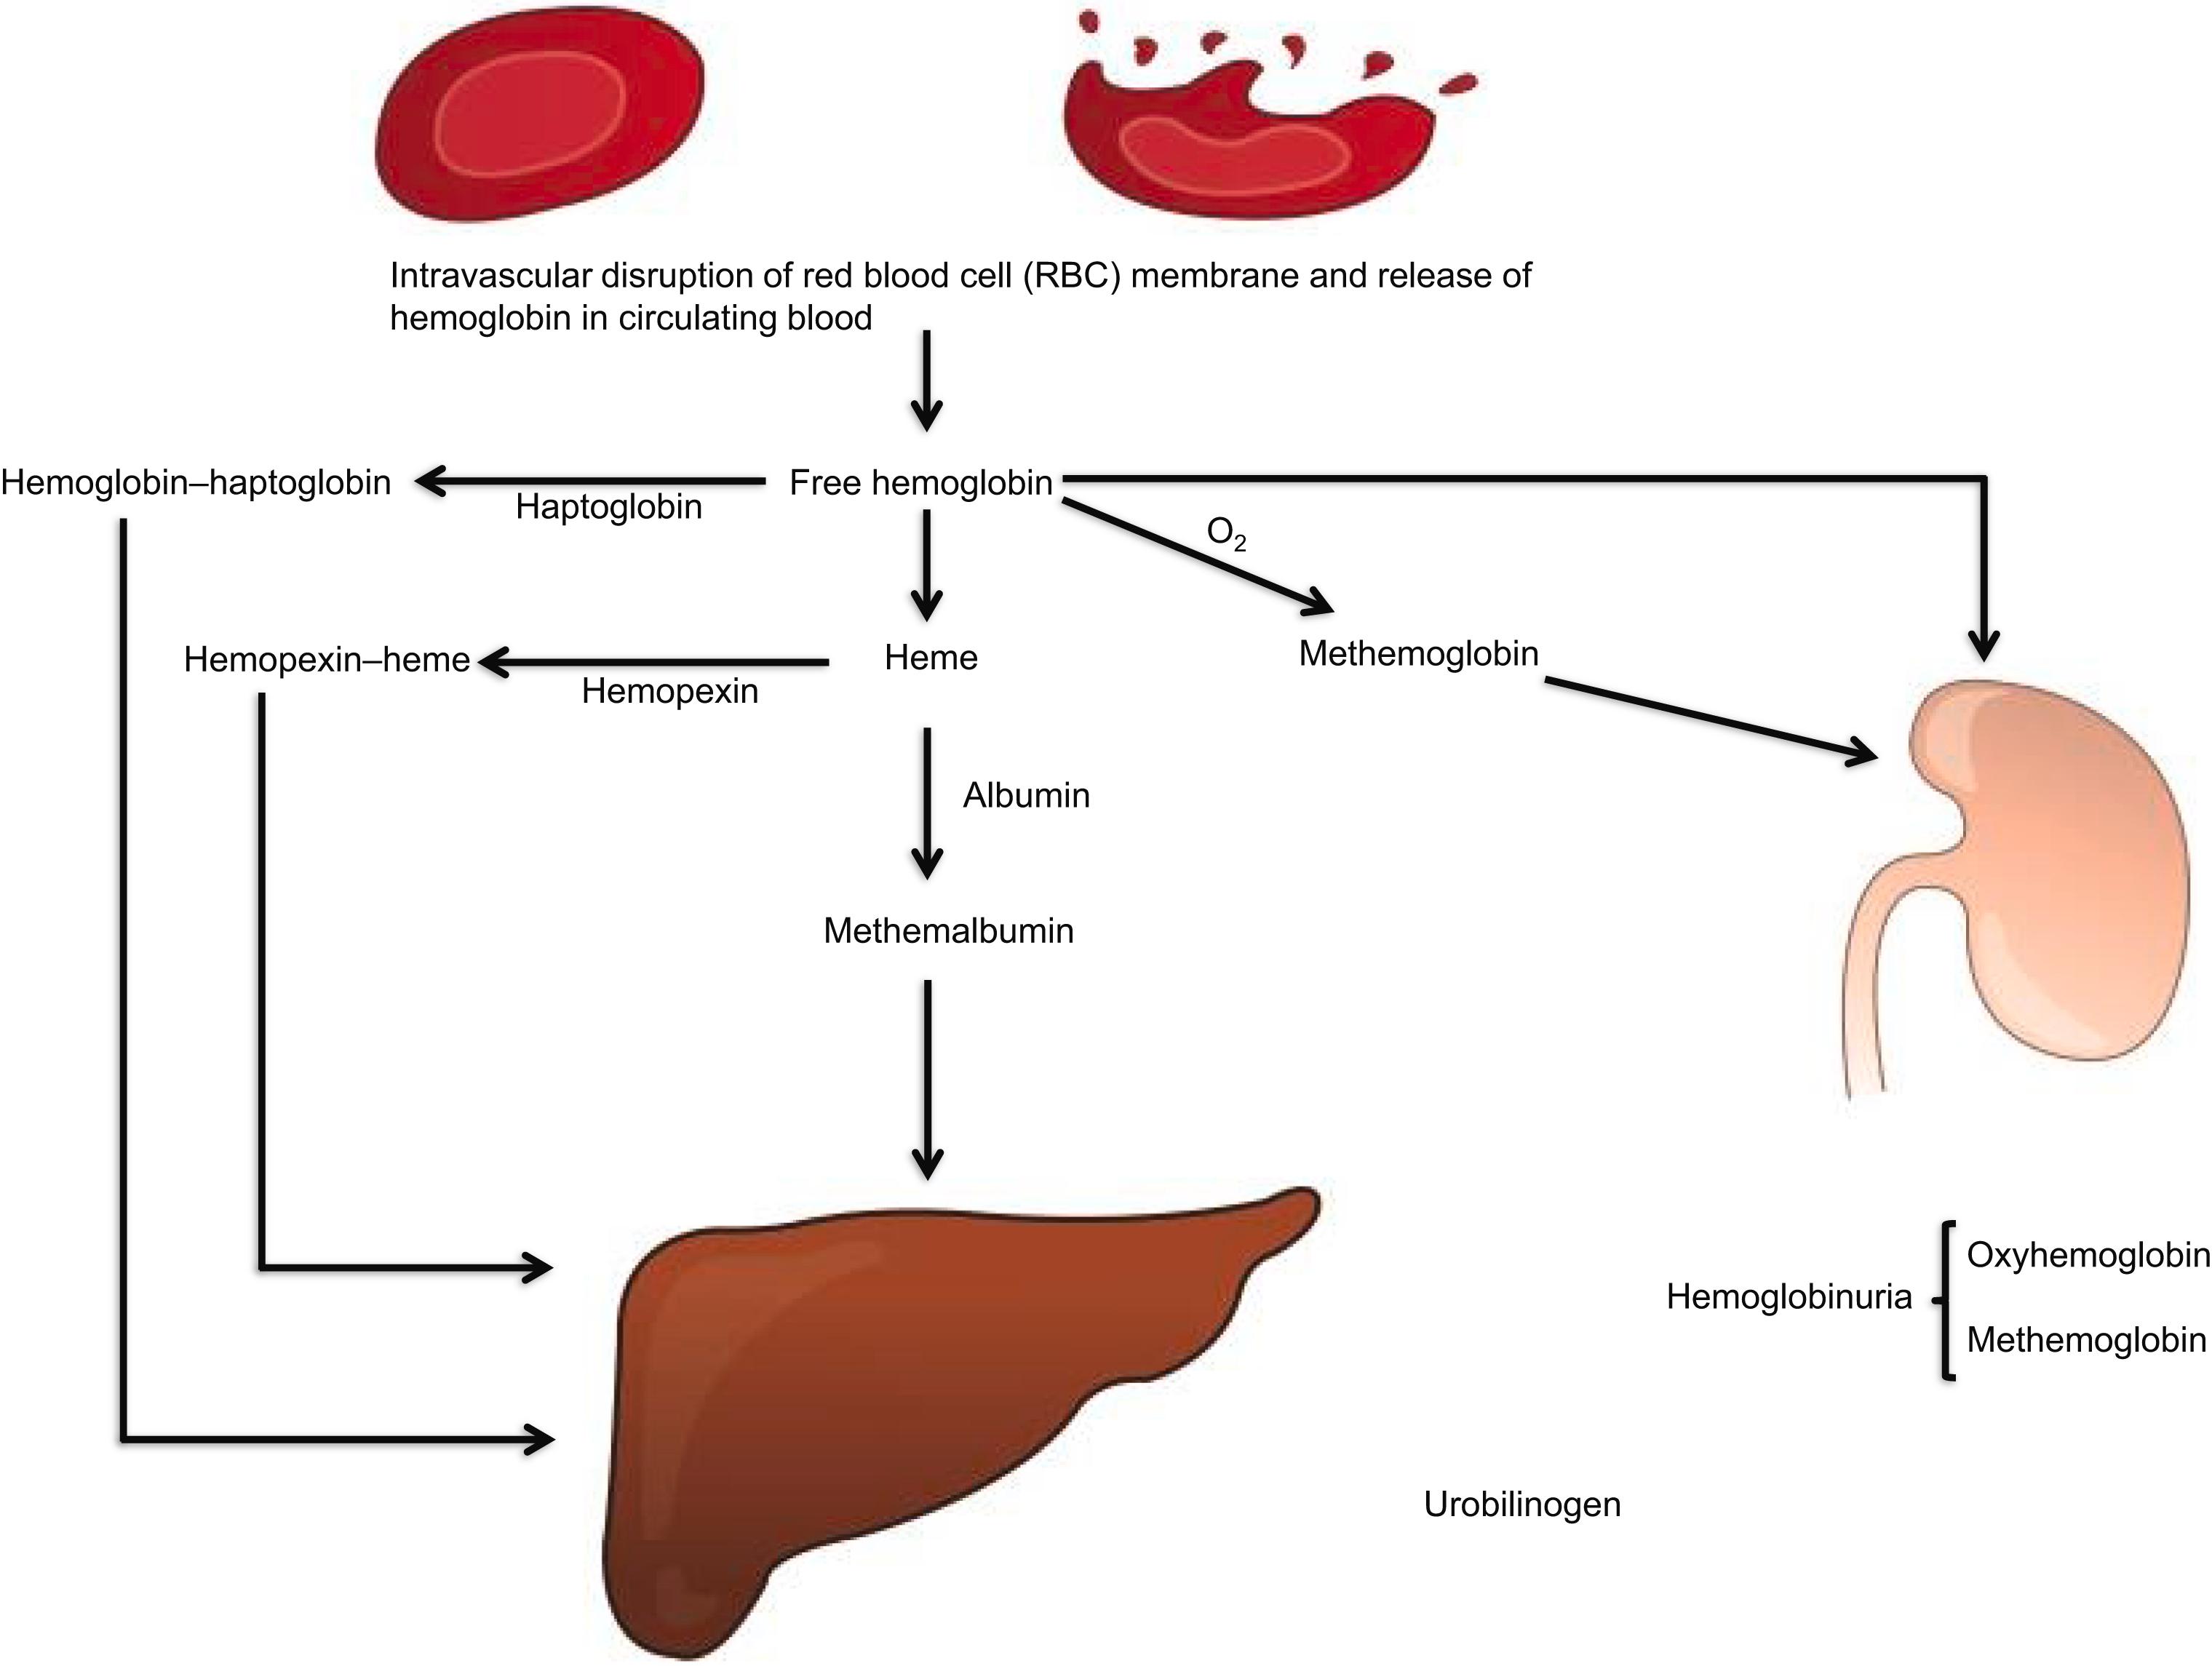 Figure 7.2, Intravascular hemoglobin catabolism following intravascular hemolysis. Hemoglobin–haptoglobin, hemopexin–heme, and methemalbumin are cleared by hepatocytes. Heme is converted to iron and bilirubin. The common pathway for both extravascular and intravascular hemolysis is the conjugation of bilirubin (bilirubin glucuronide) by the hepatocytes, its excretion in bile and ultimately formation of urobilinogen by the bacteria in the gut. Part of urobilinogen enters the enterohepatic circulation and part is excreted by the kidney in urine, and the remainder of urobilinogen is excreted in stool.